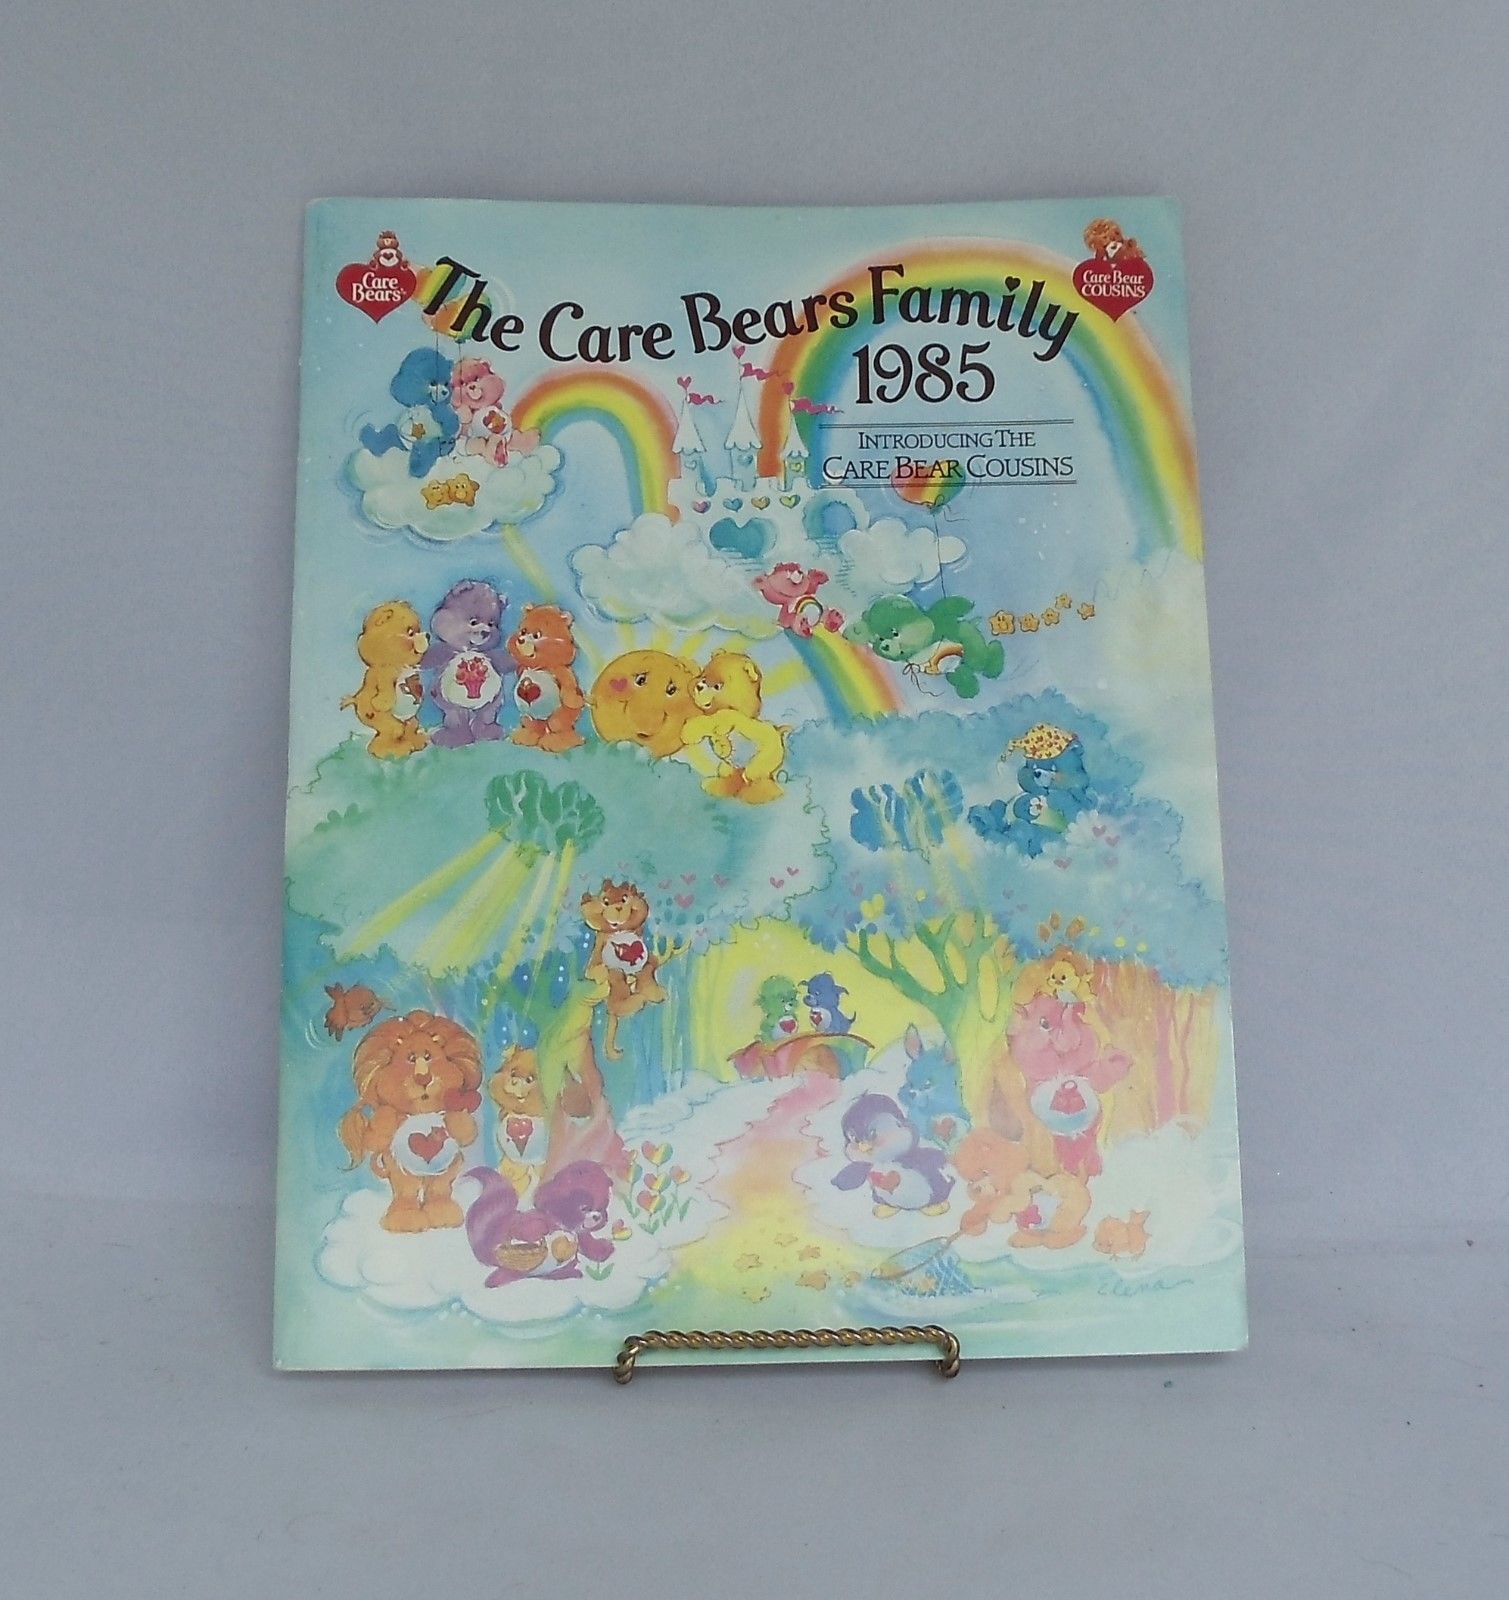 1985 CARE BEAR SALESMAN CATALOG for RETAILERS COUSINS HARD TO FIND